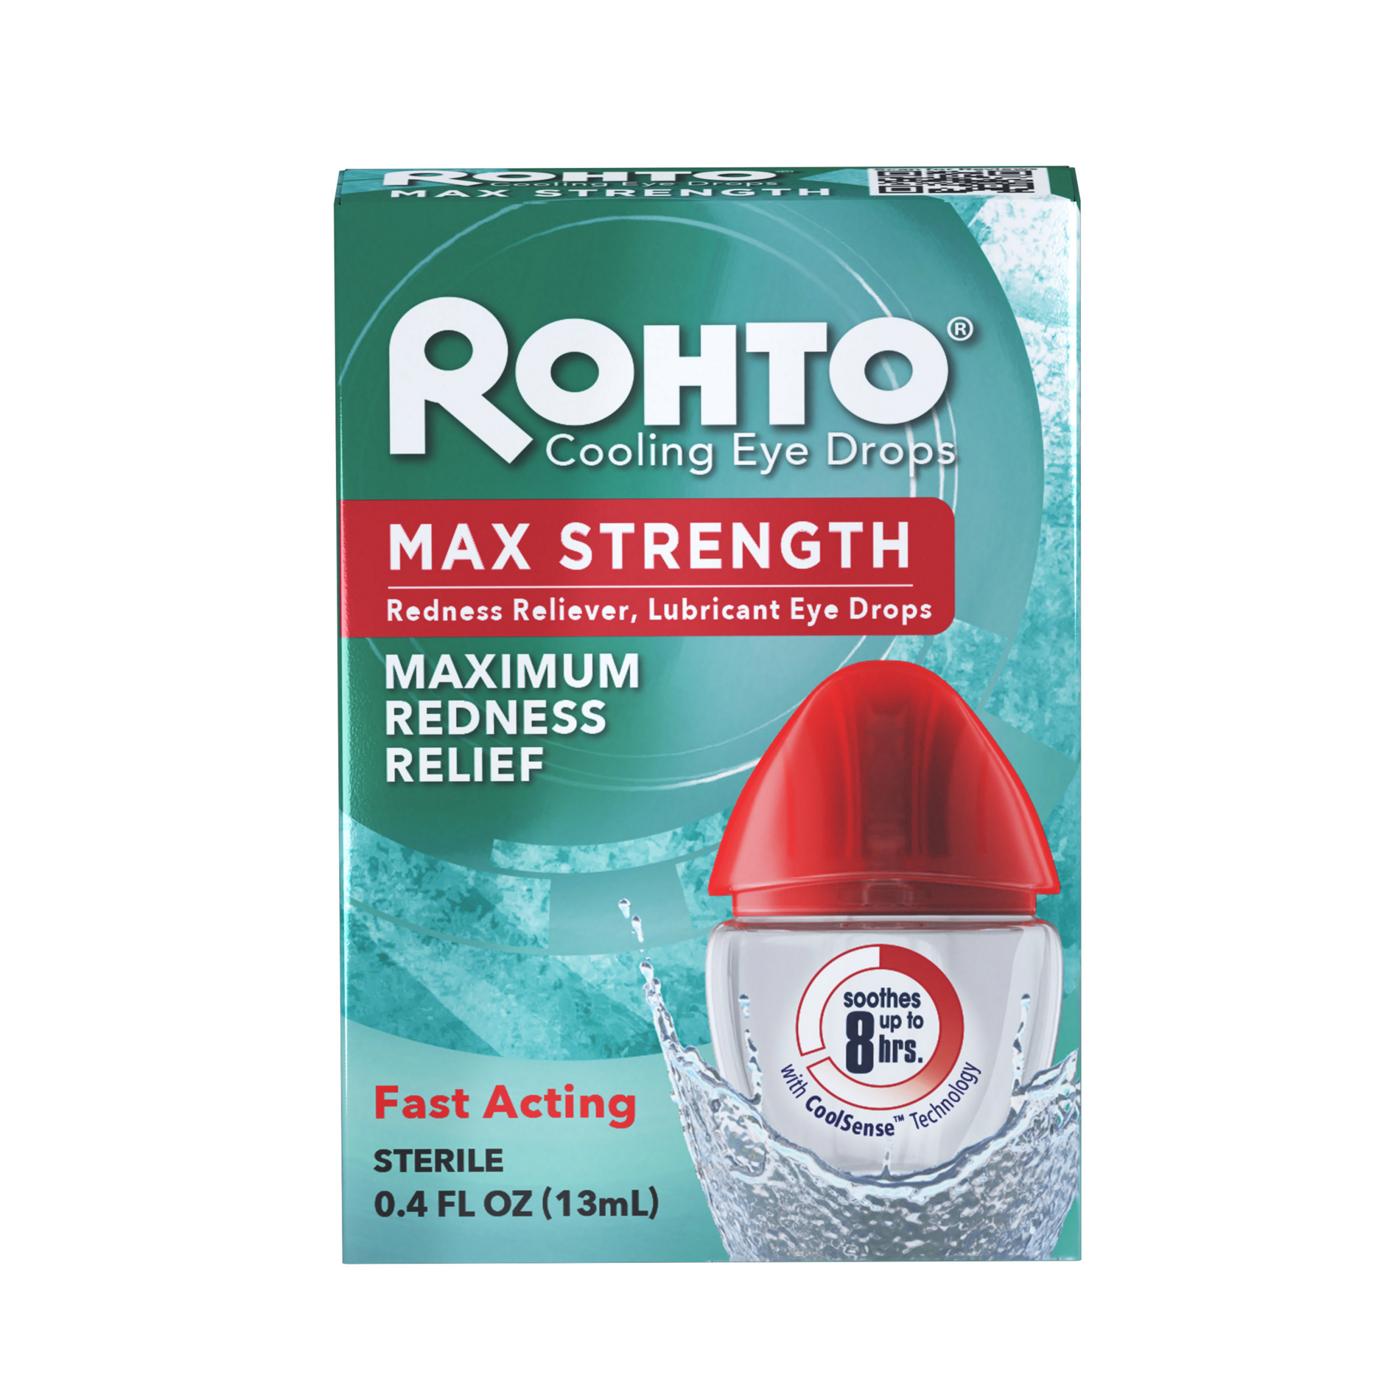 Rohto Max Strength Redness Relieving Eye Drops; image 1 of 3